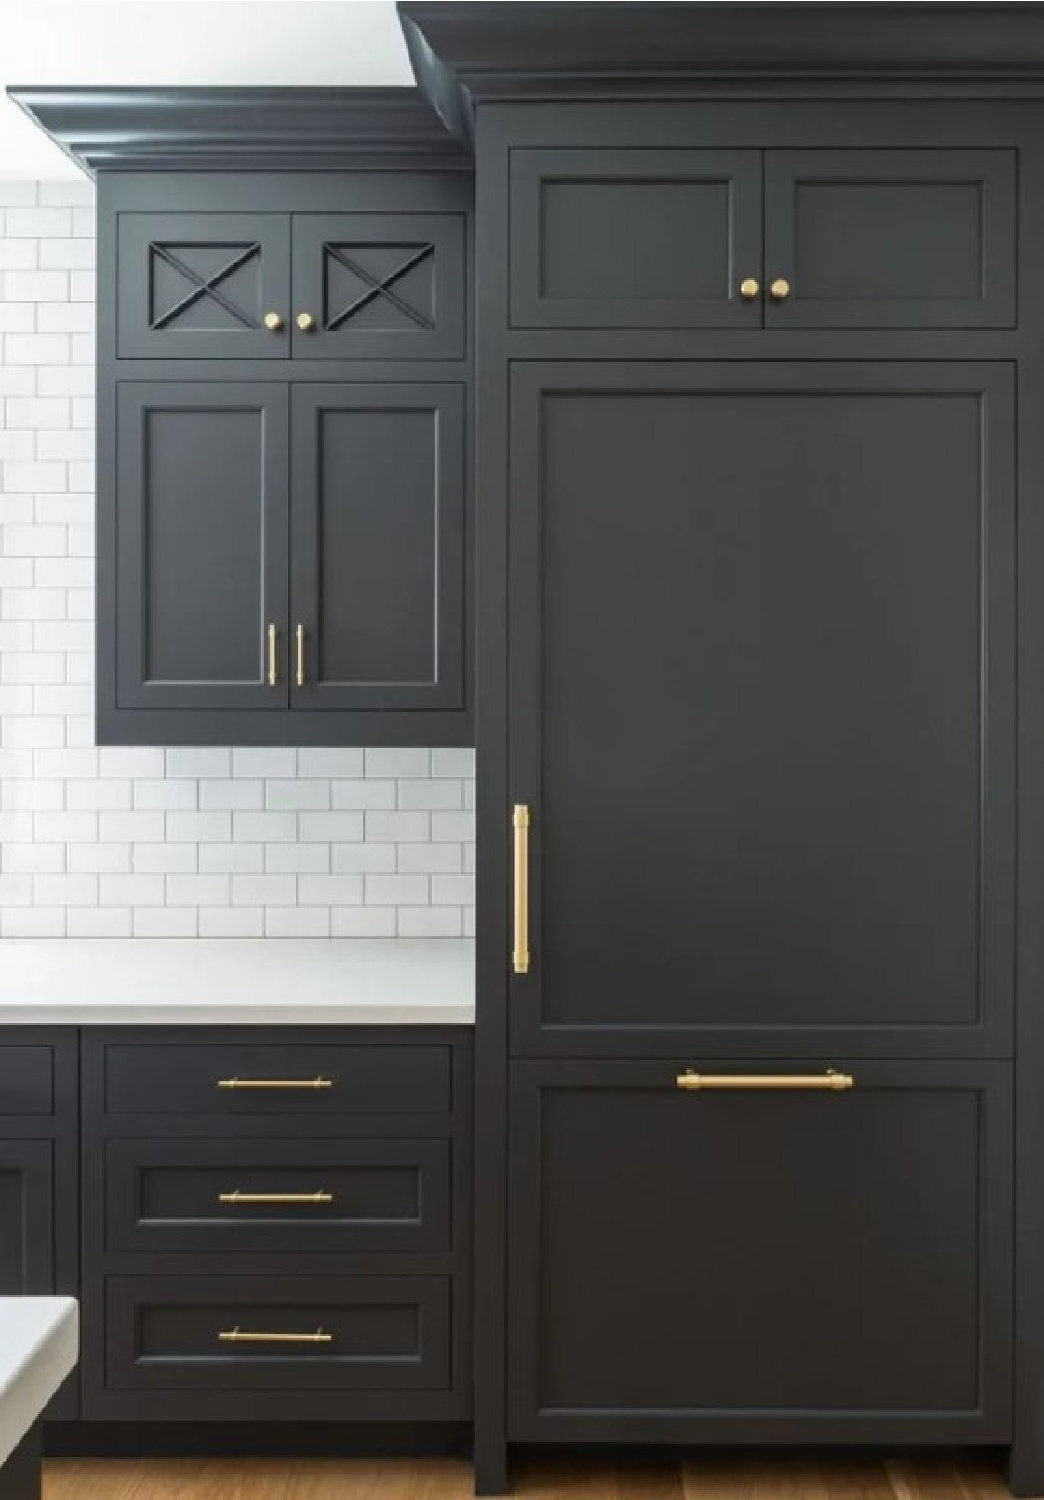 Benjamin Moore Cheating Heart - a black paint color on these kitchen cabinets in a design by The Fox Group. #cheatingheart #blackcabinets